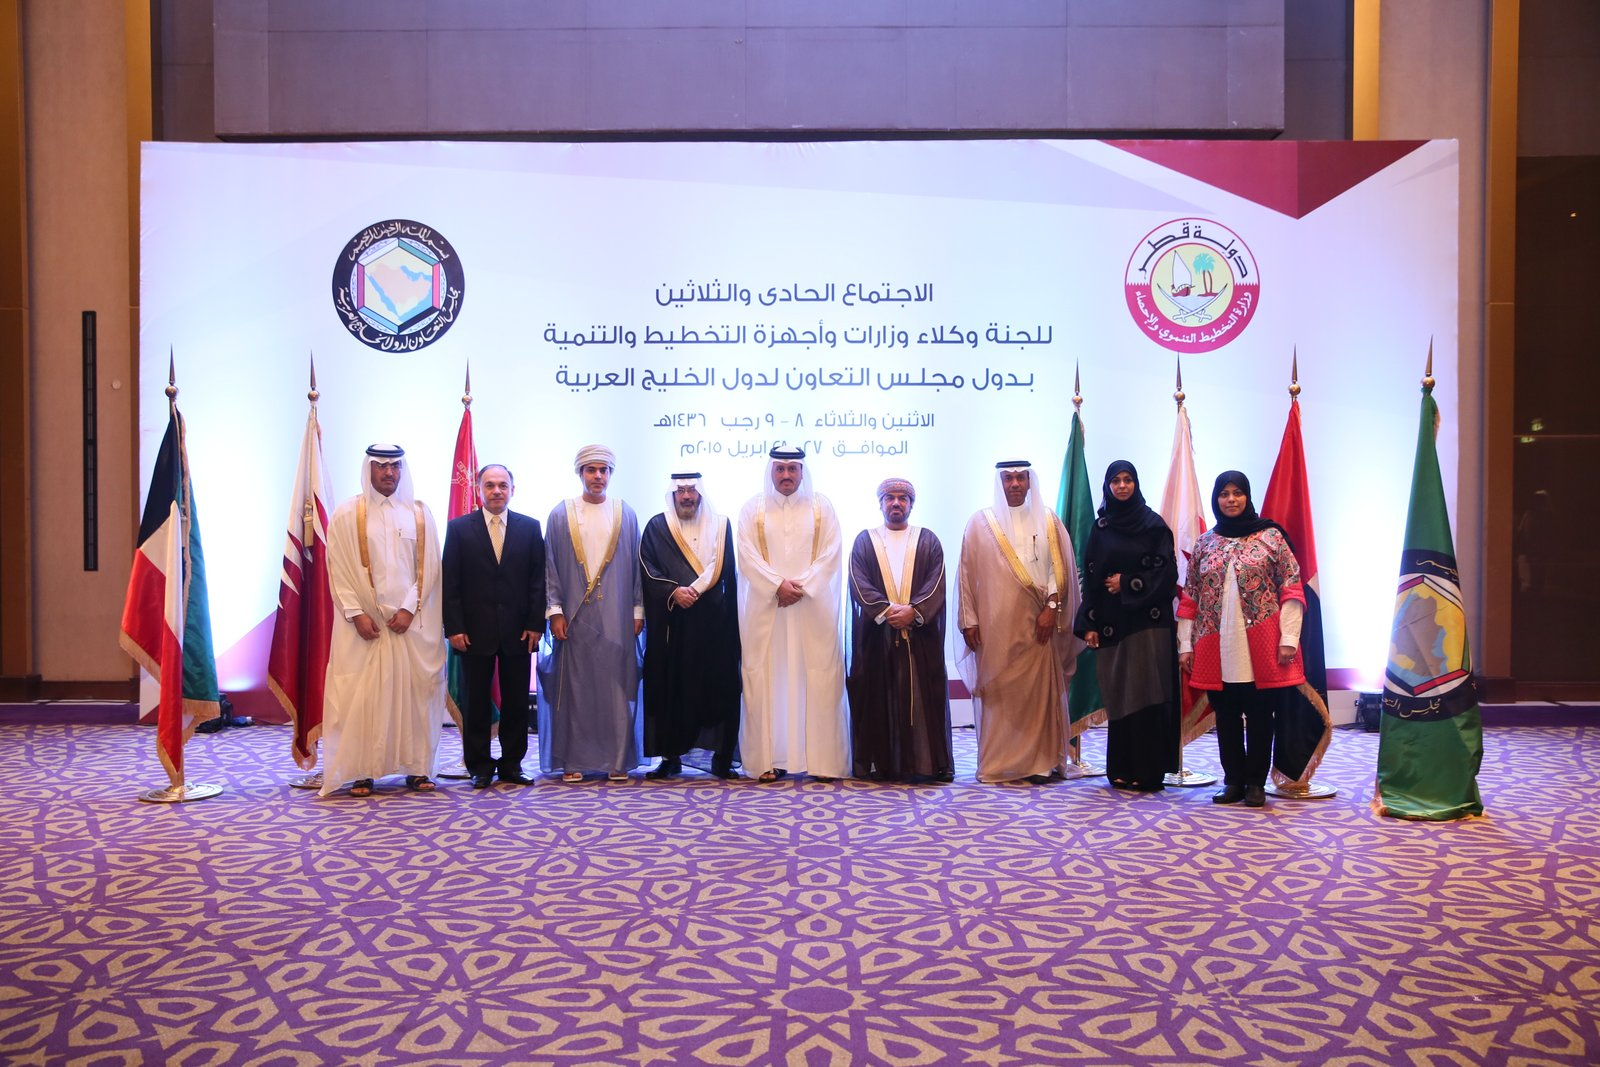 The 31st meeting of GCC undersecretaries of planning and development started